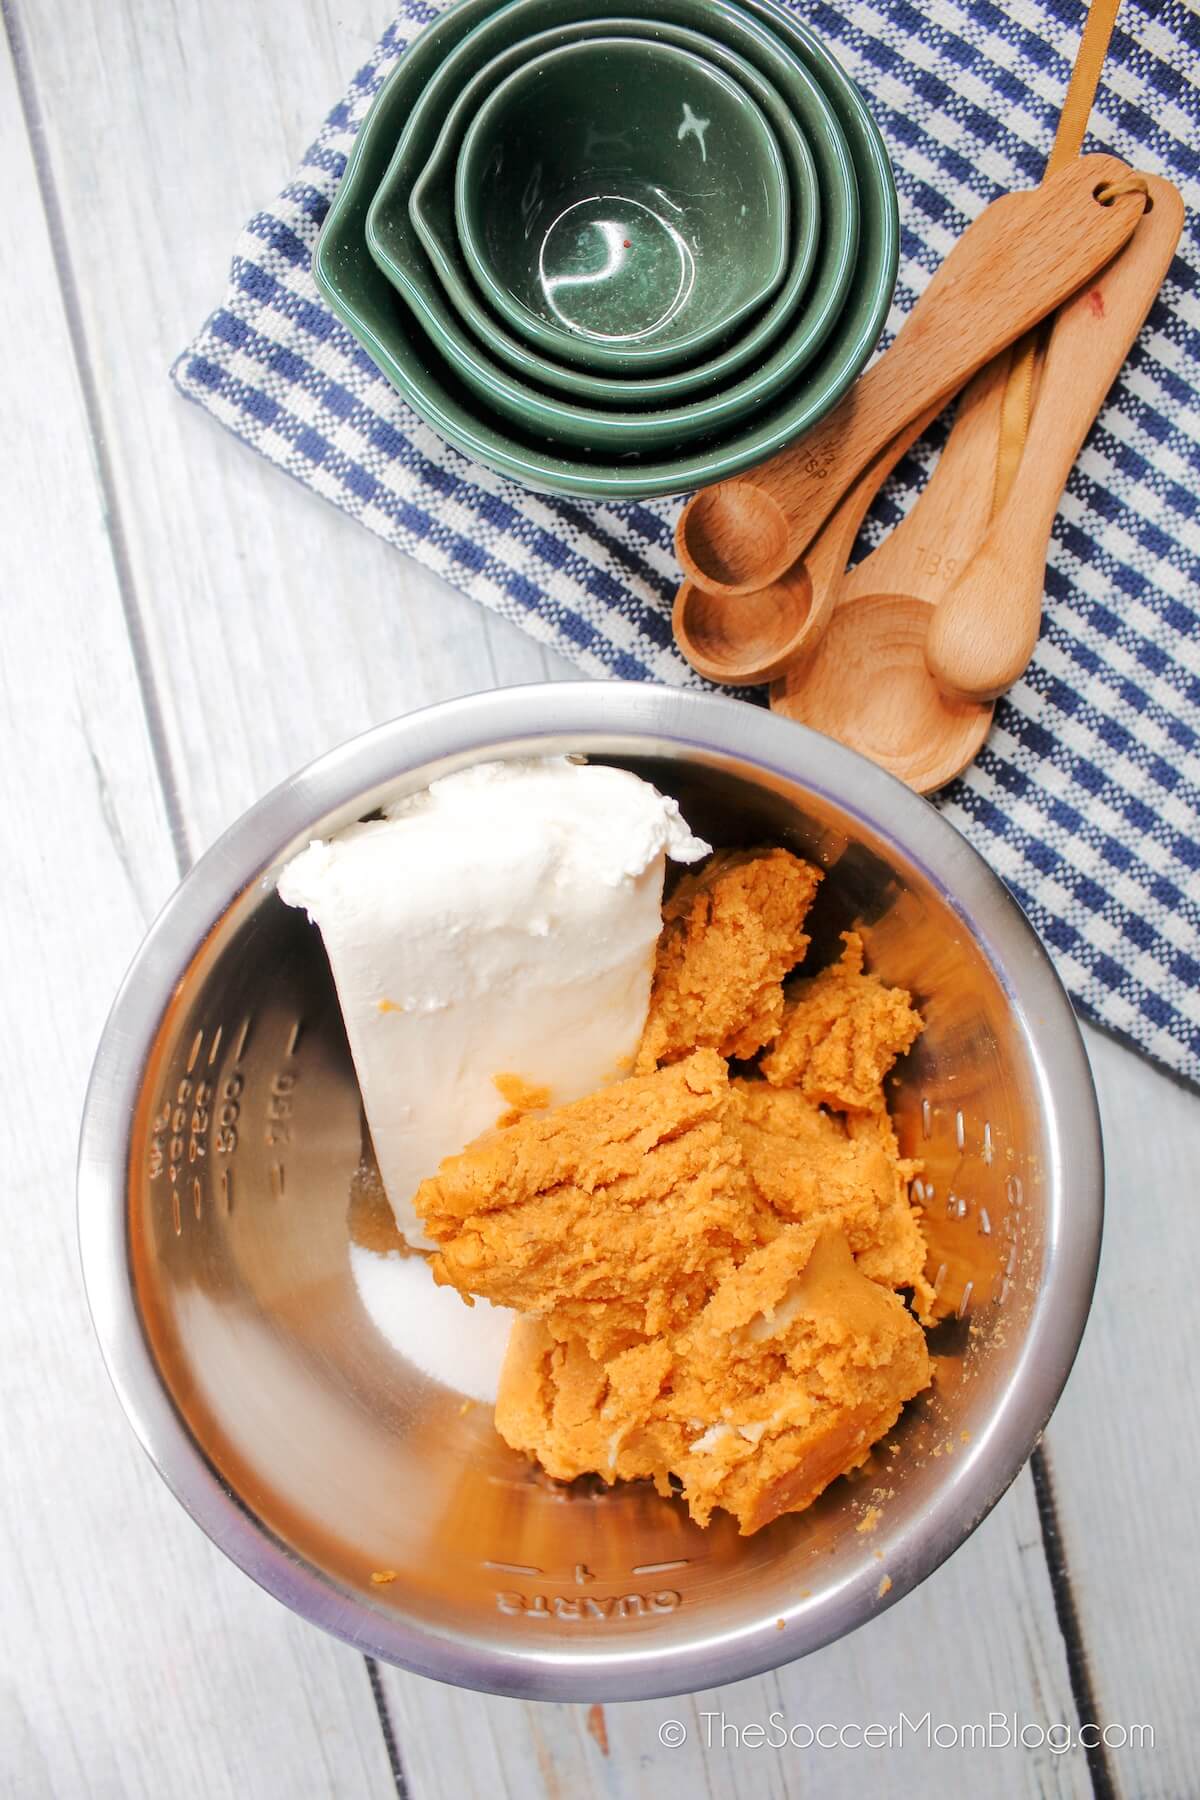 Cream Cheese and Pumpkin puree in a mixing bowl